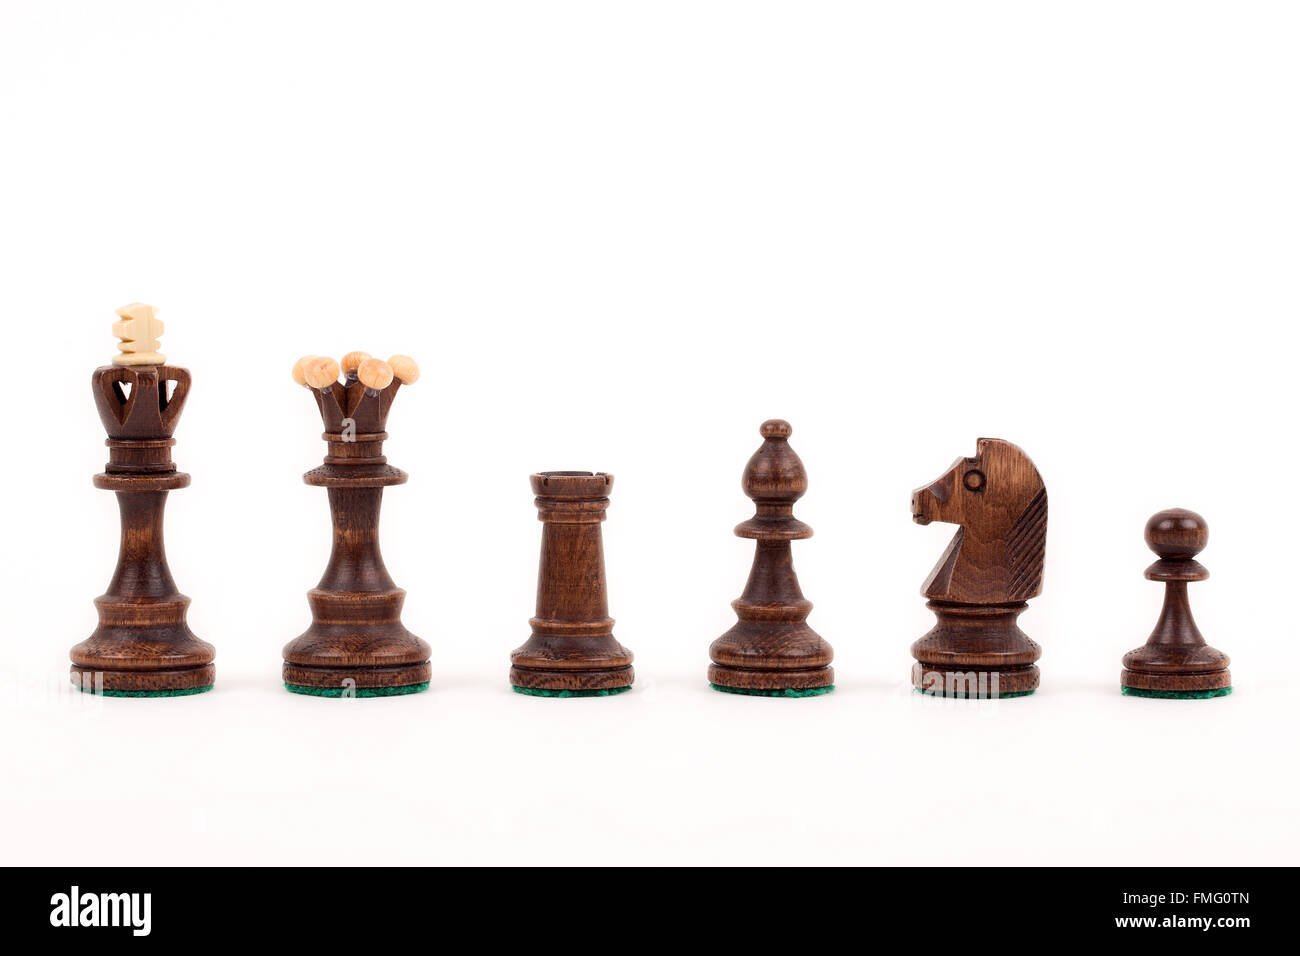 Wooden chess pieces on a white background Stock Photo